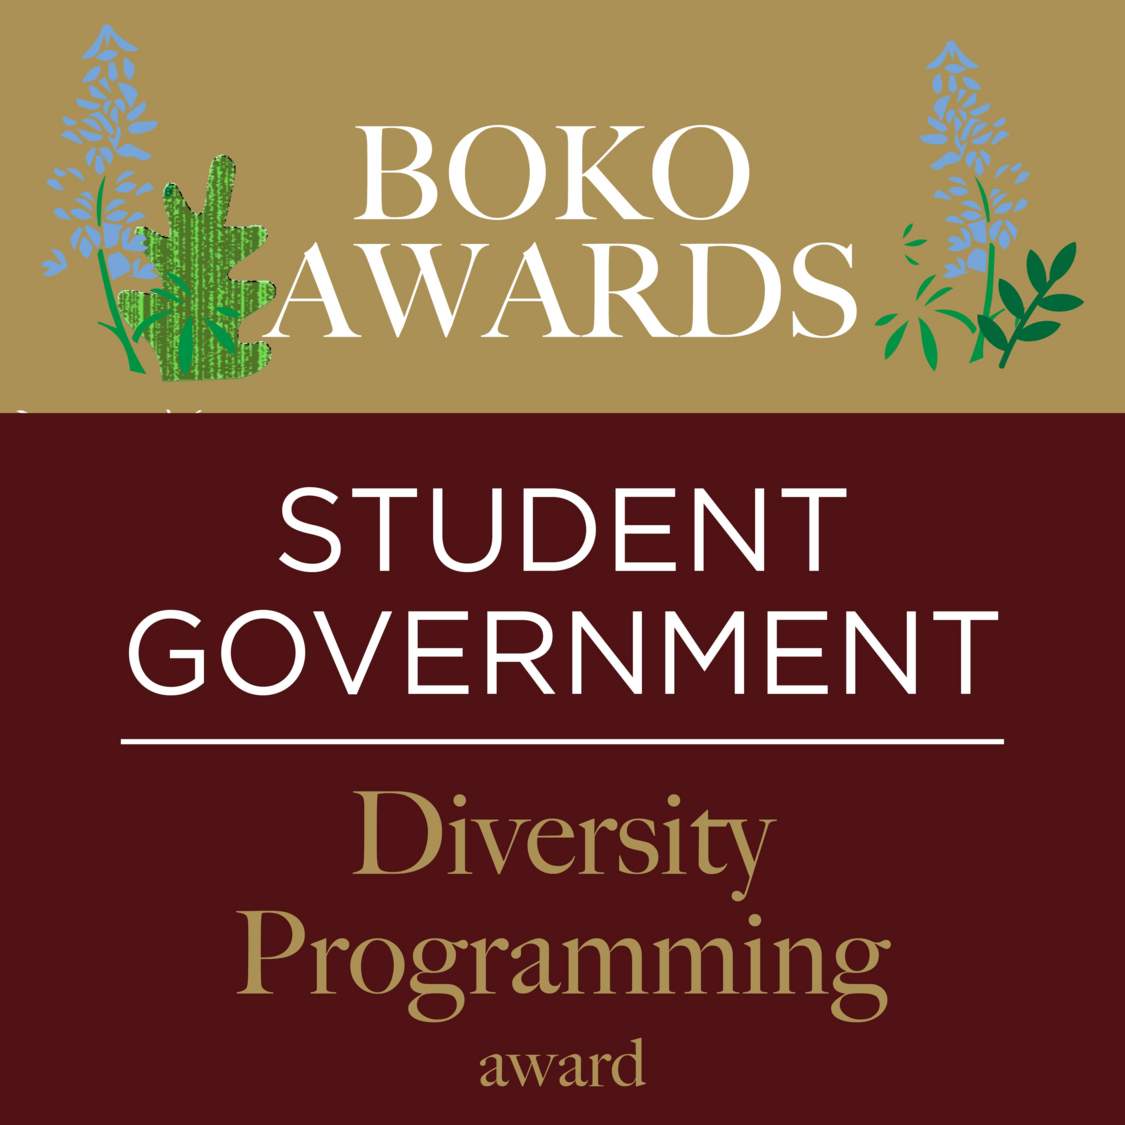 Picture of text displaying that Student Government won the Diversity Programming award.